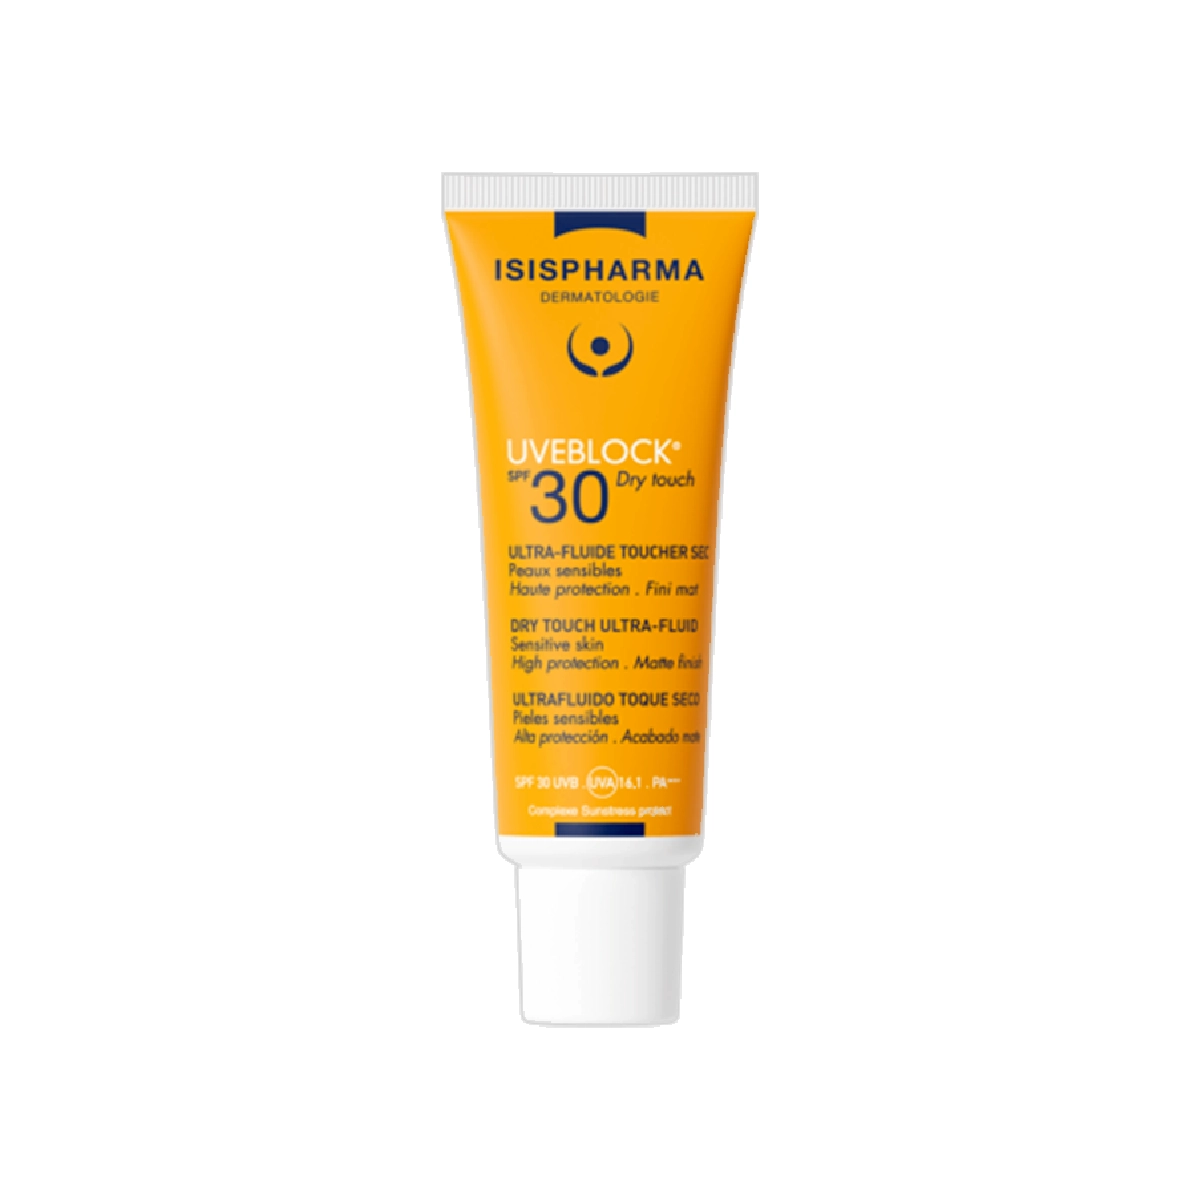 First product image of ISISPHARMA UVE Block SPF 30 Dry Touch 40ml